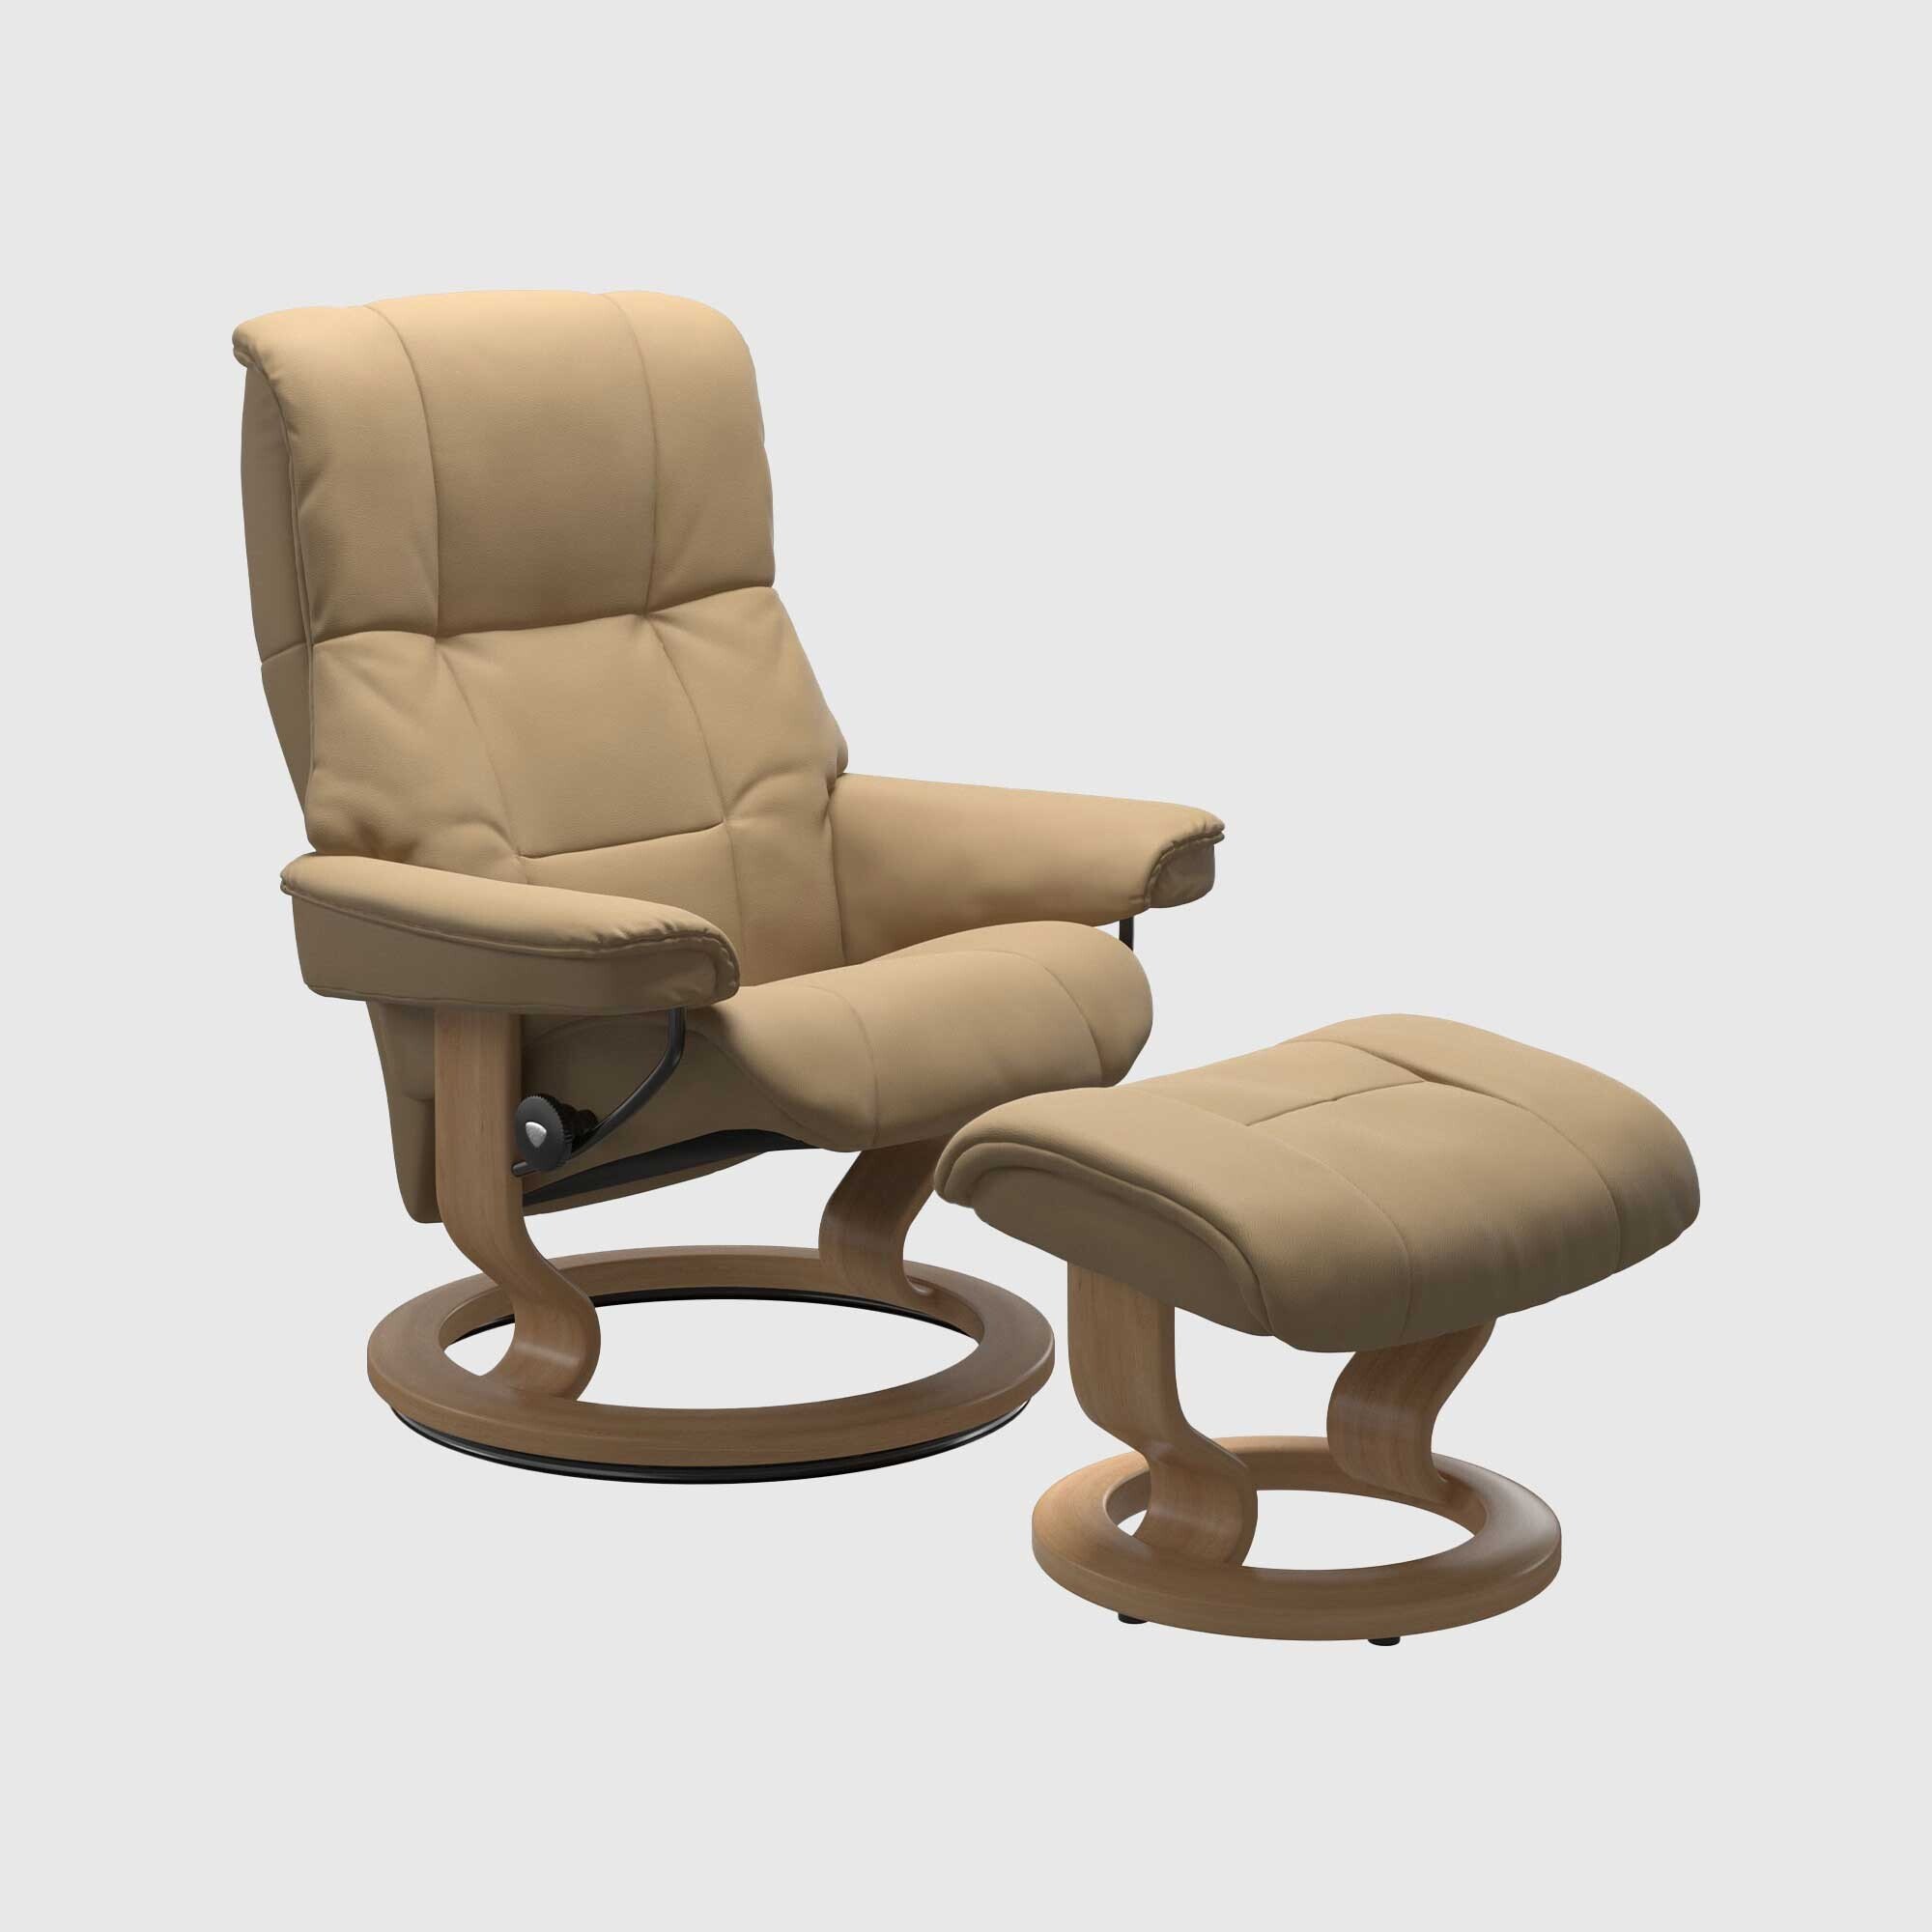 Stressless Mayfair Large Classic Recliner Chair & Footstool, Neutral | Barker & Stonehouse